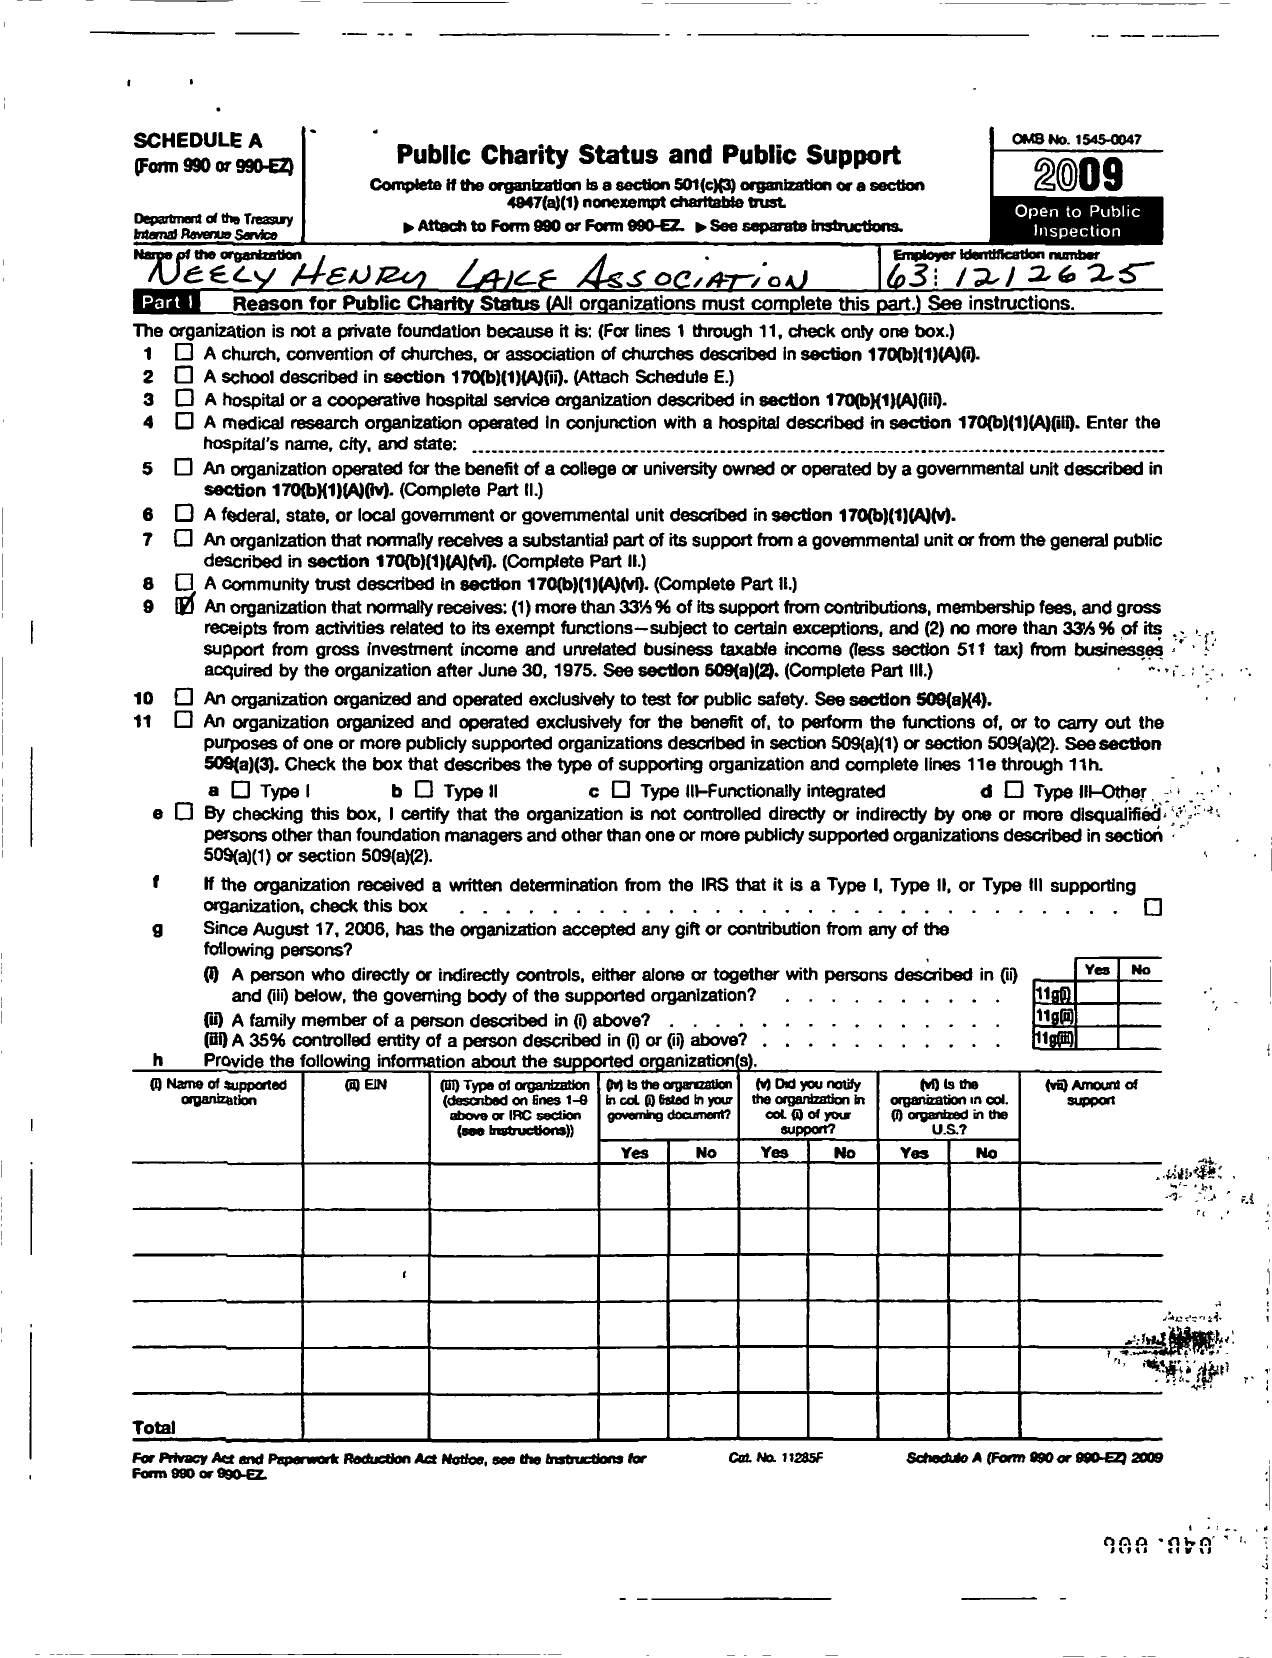 Image of first page of 2009 Form 990ER for Neely Henry Lake Association